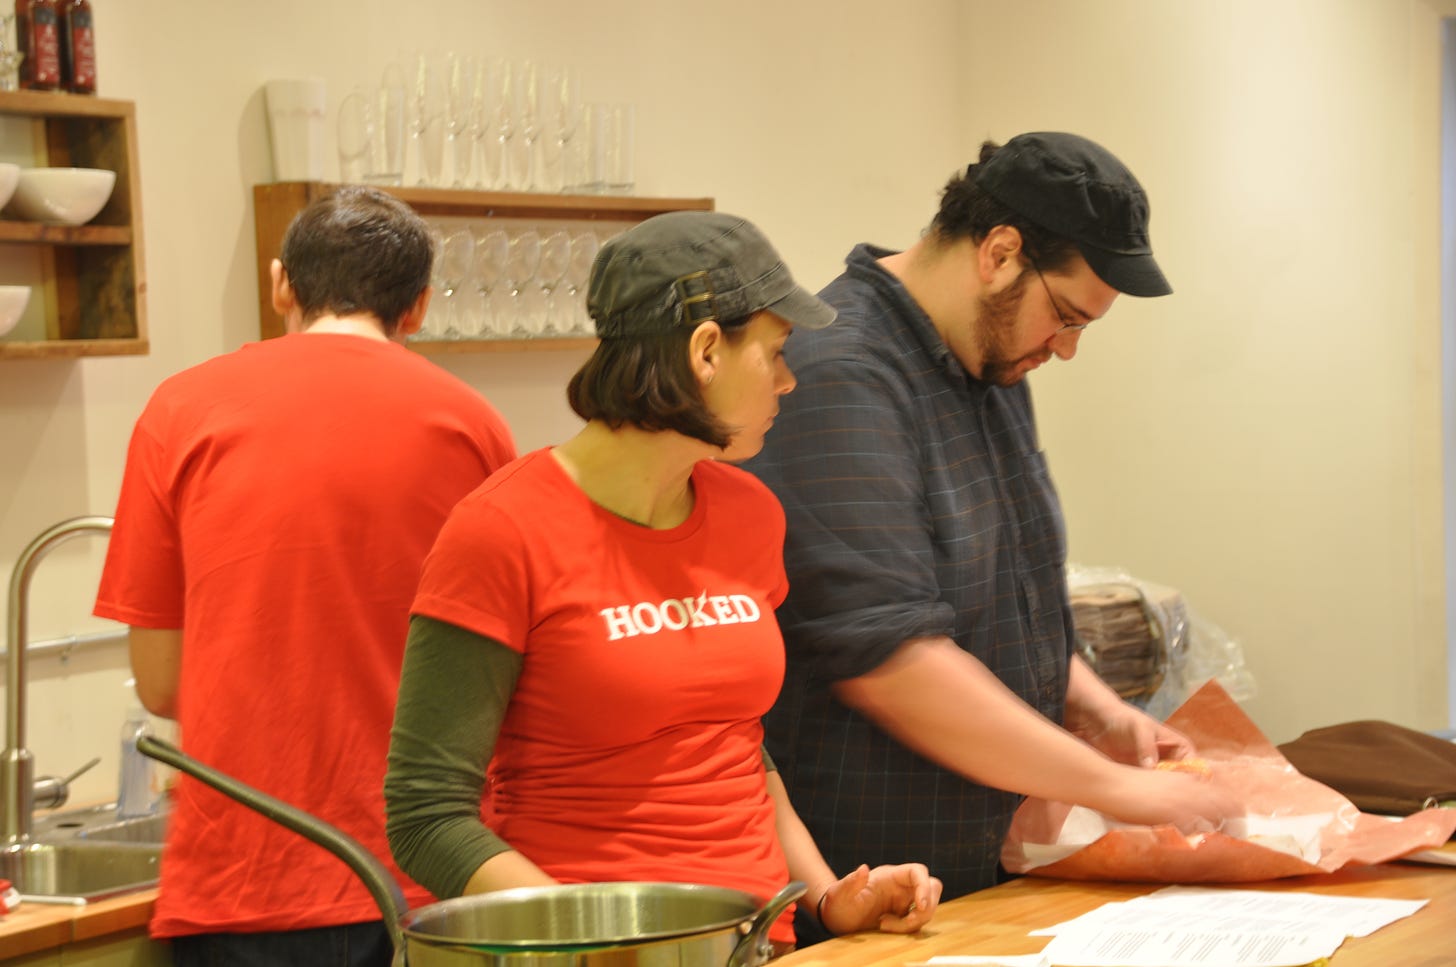 three people standing in a room, two people face a counter where they are looking at something inside of butcher paper, a pan is in the foreground.